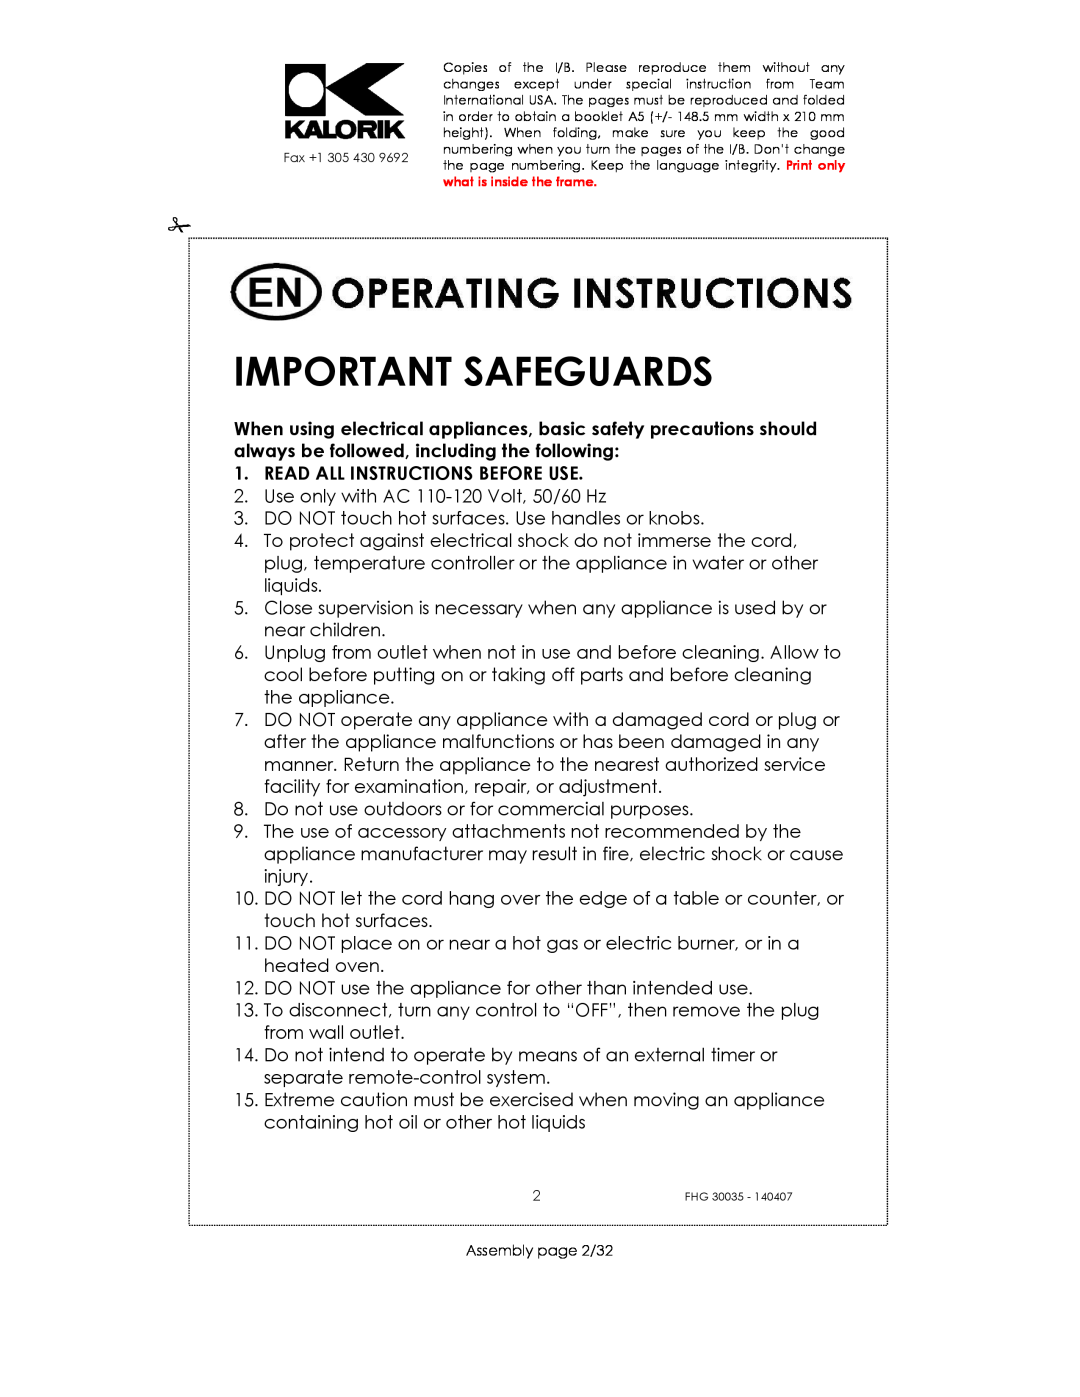 Kalorik FHG 30035 manual Important Safeguards, Read All Instructions Before Use 